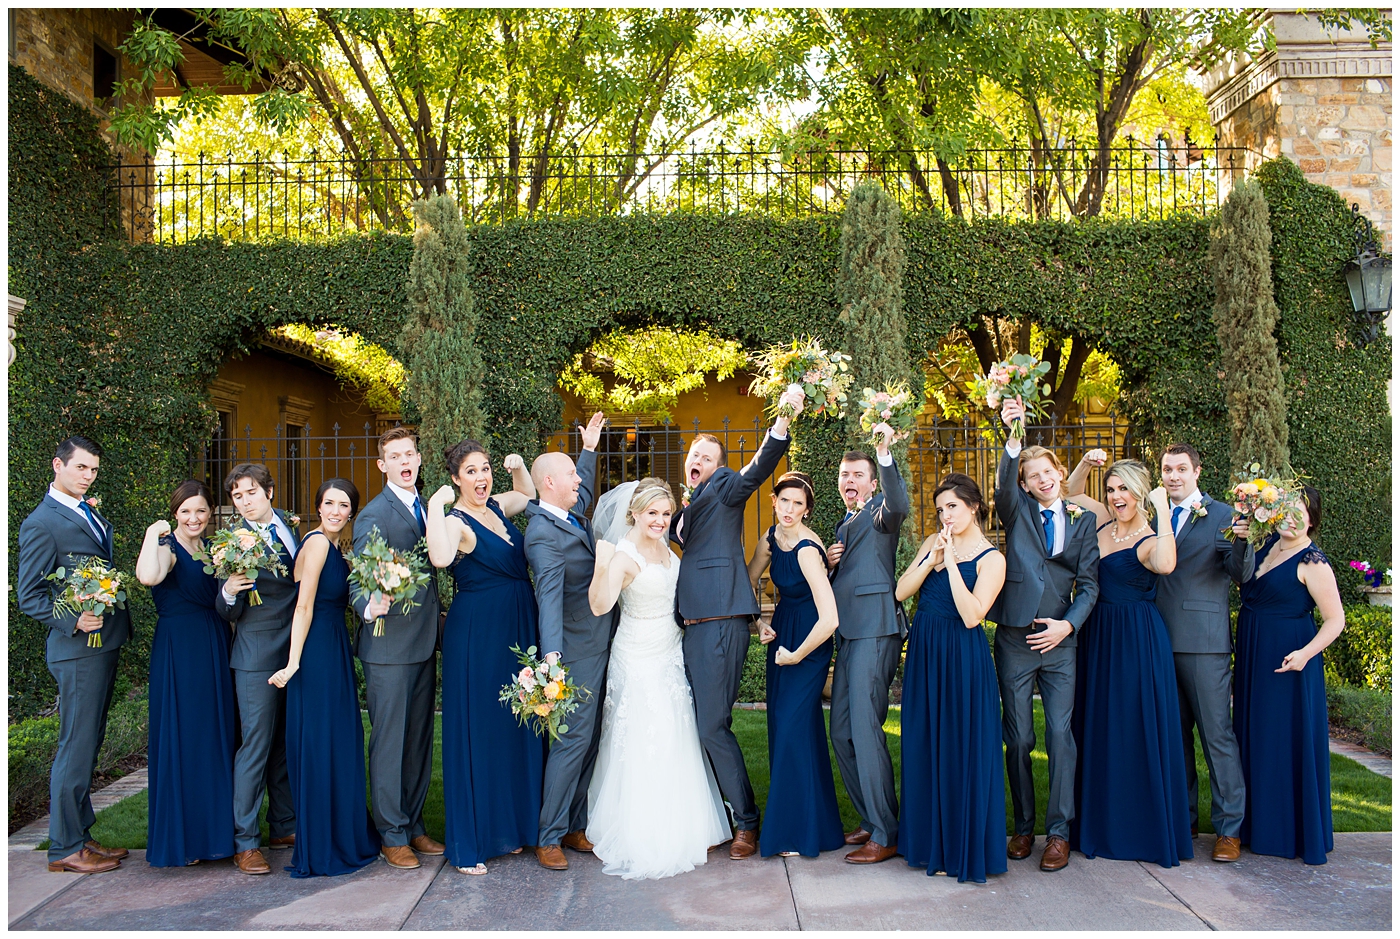 bride in essence designs wedding dress with cap sleeves portrait group shot with bridesmaids in navy blue long dresses with groom in gray suit with pink tie and groomsmen in gray suits with blue ties